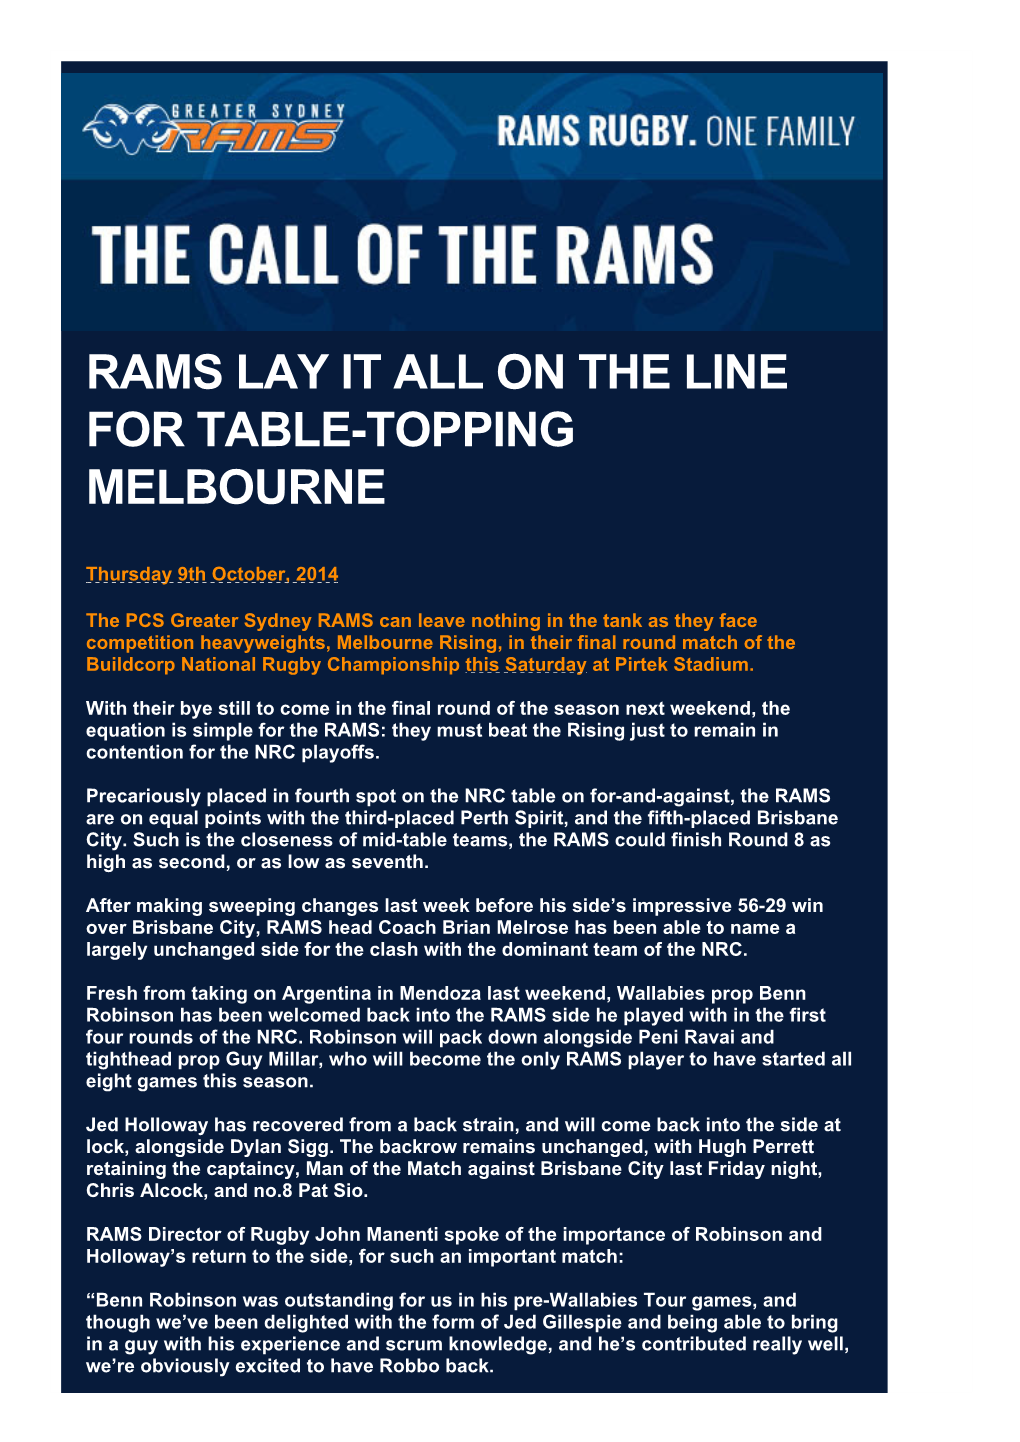 Rams Lay It All on the Line for Table-Topping Melbourne